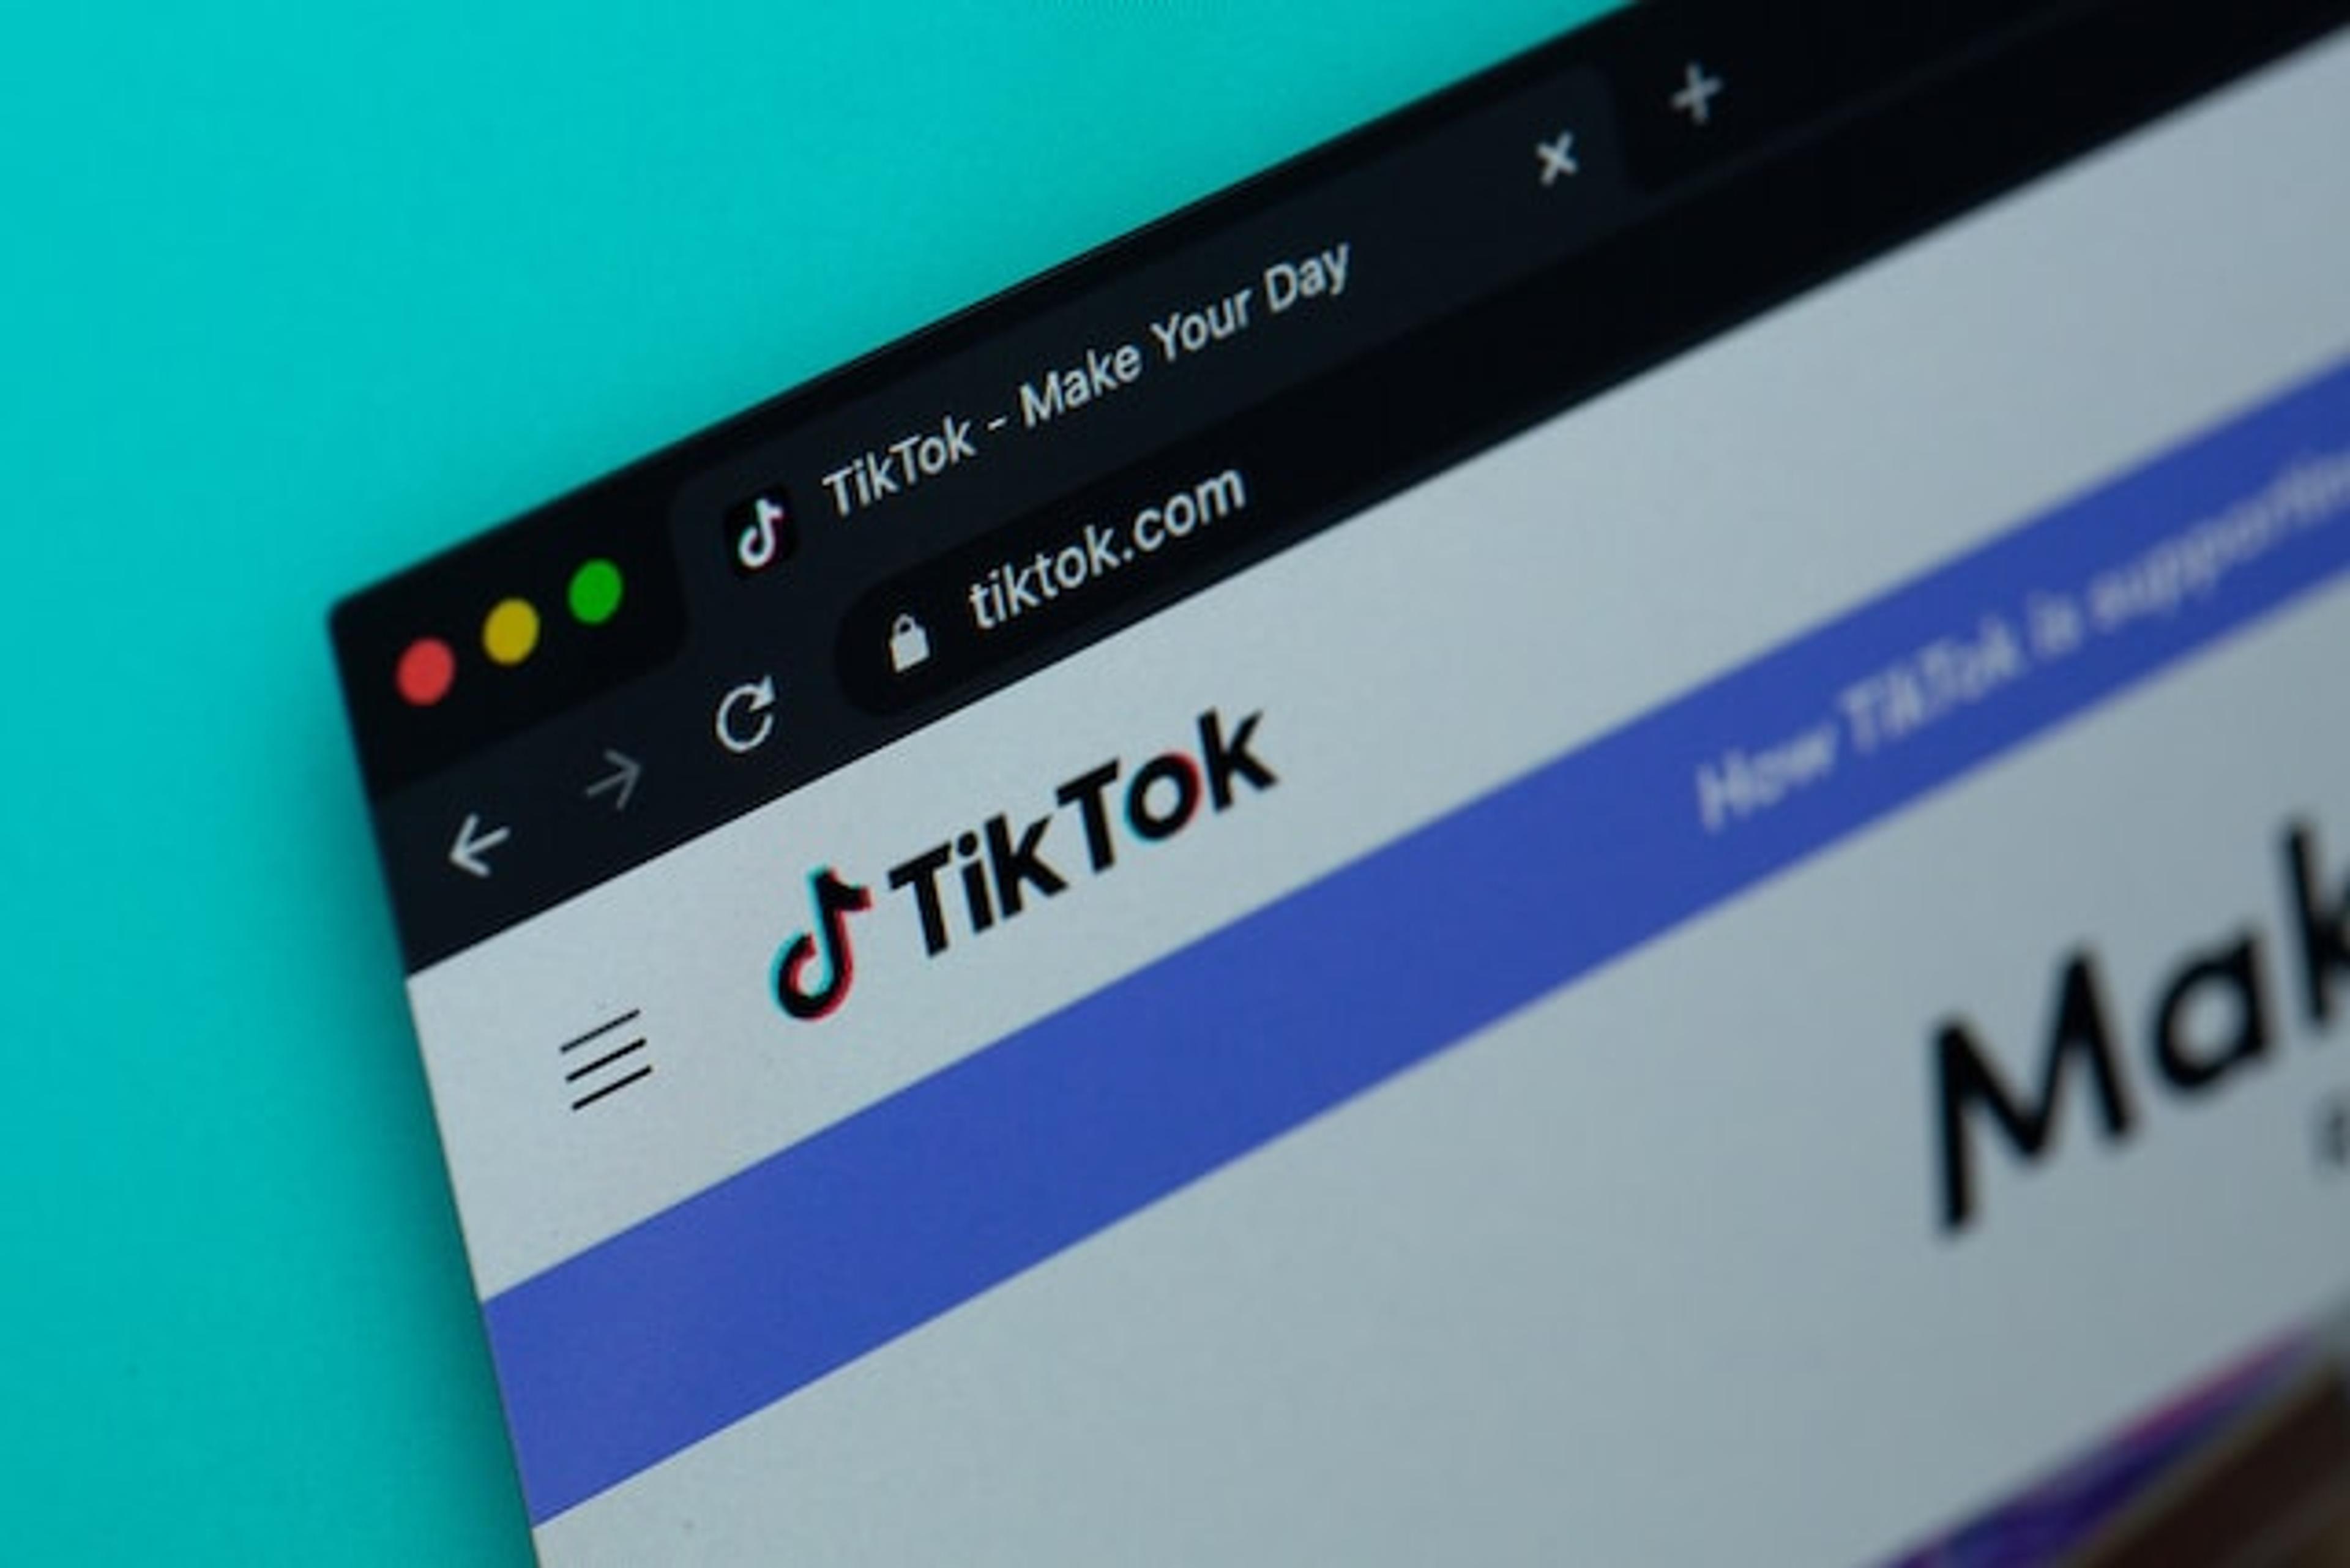 TikTok's new privacy policy: a significant stride towards safeguarding user data and privacy.